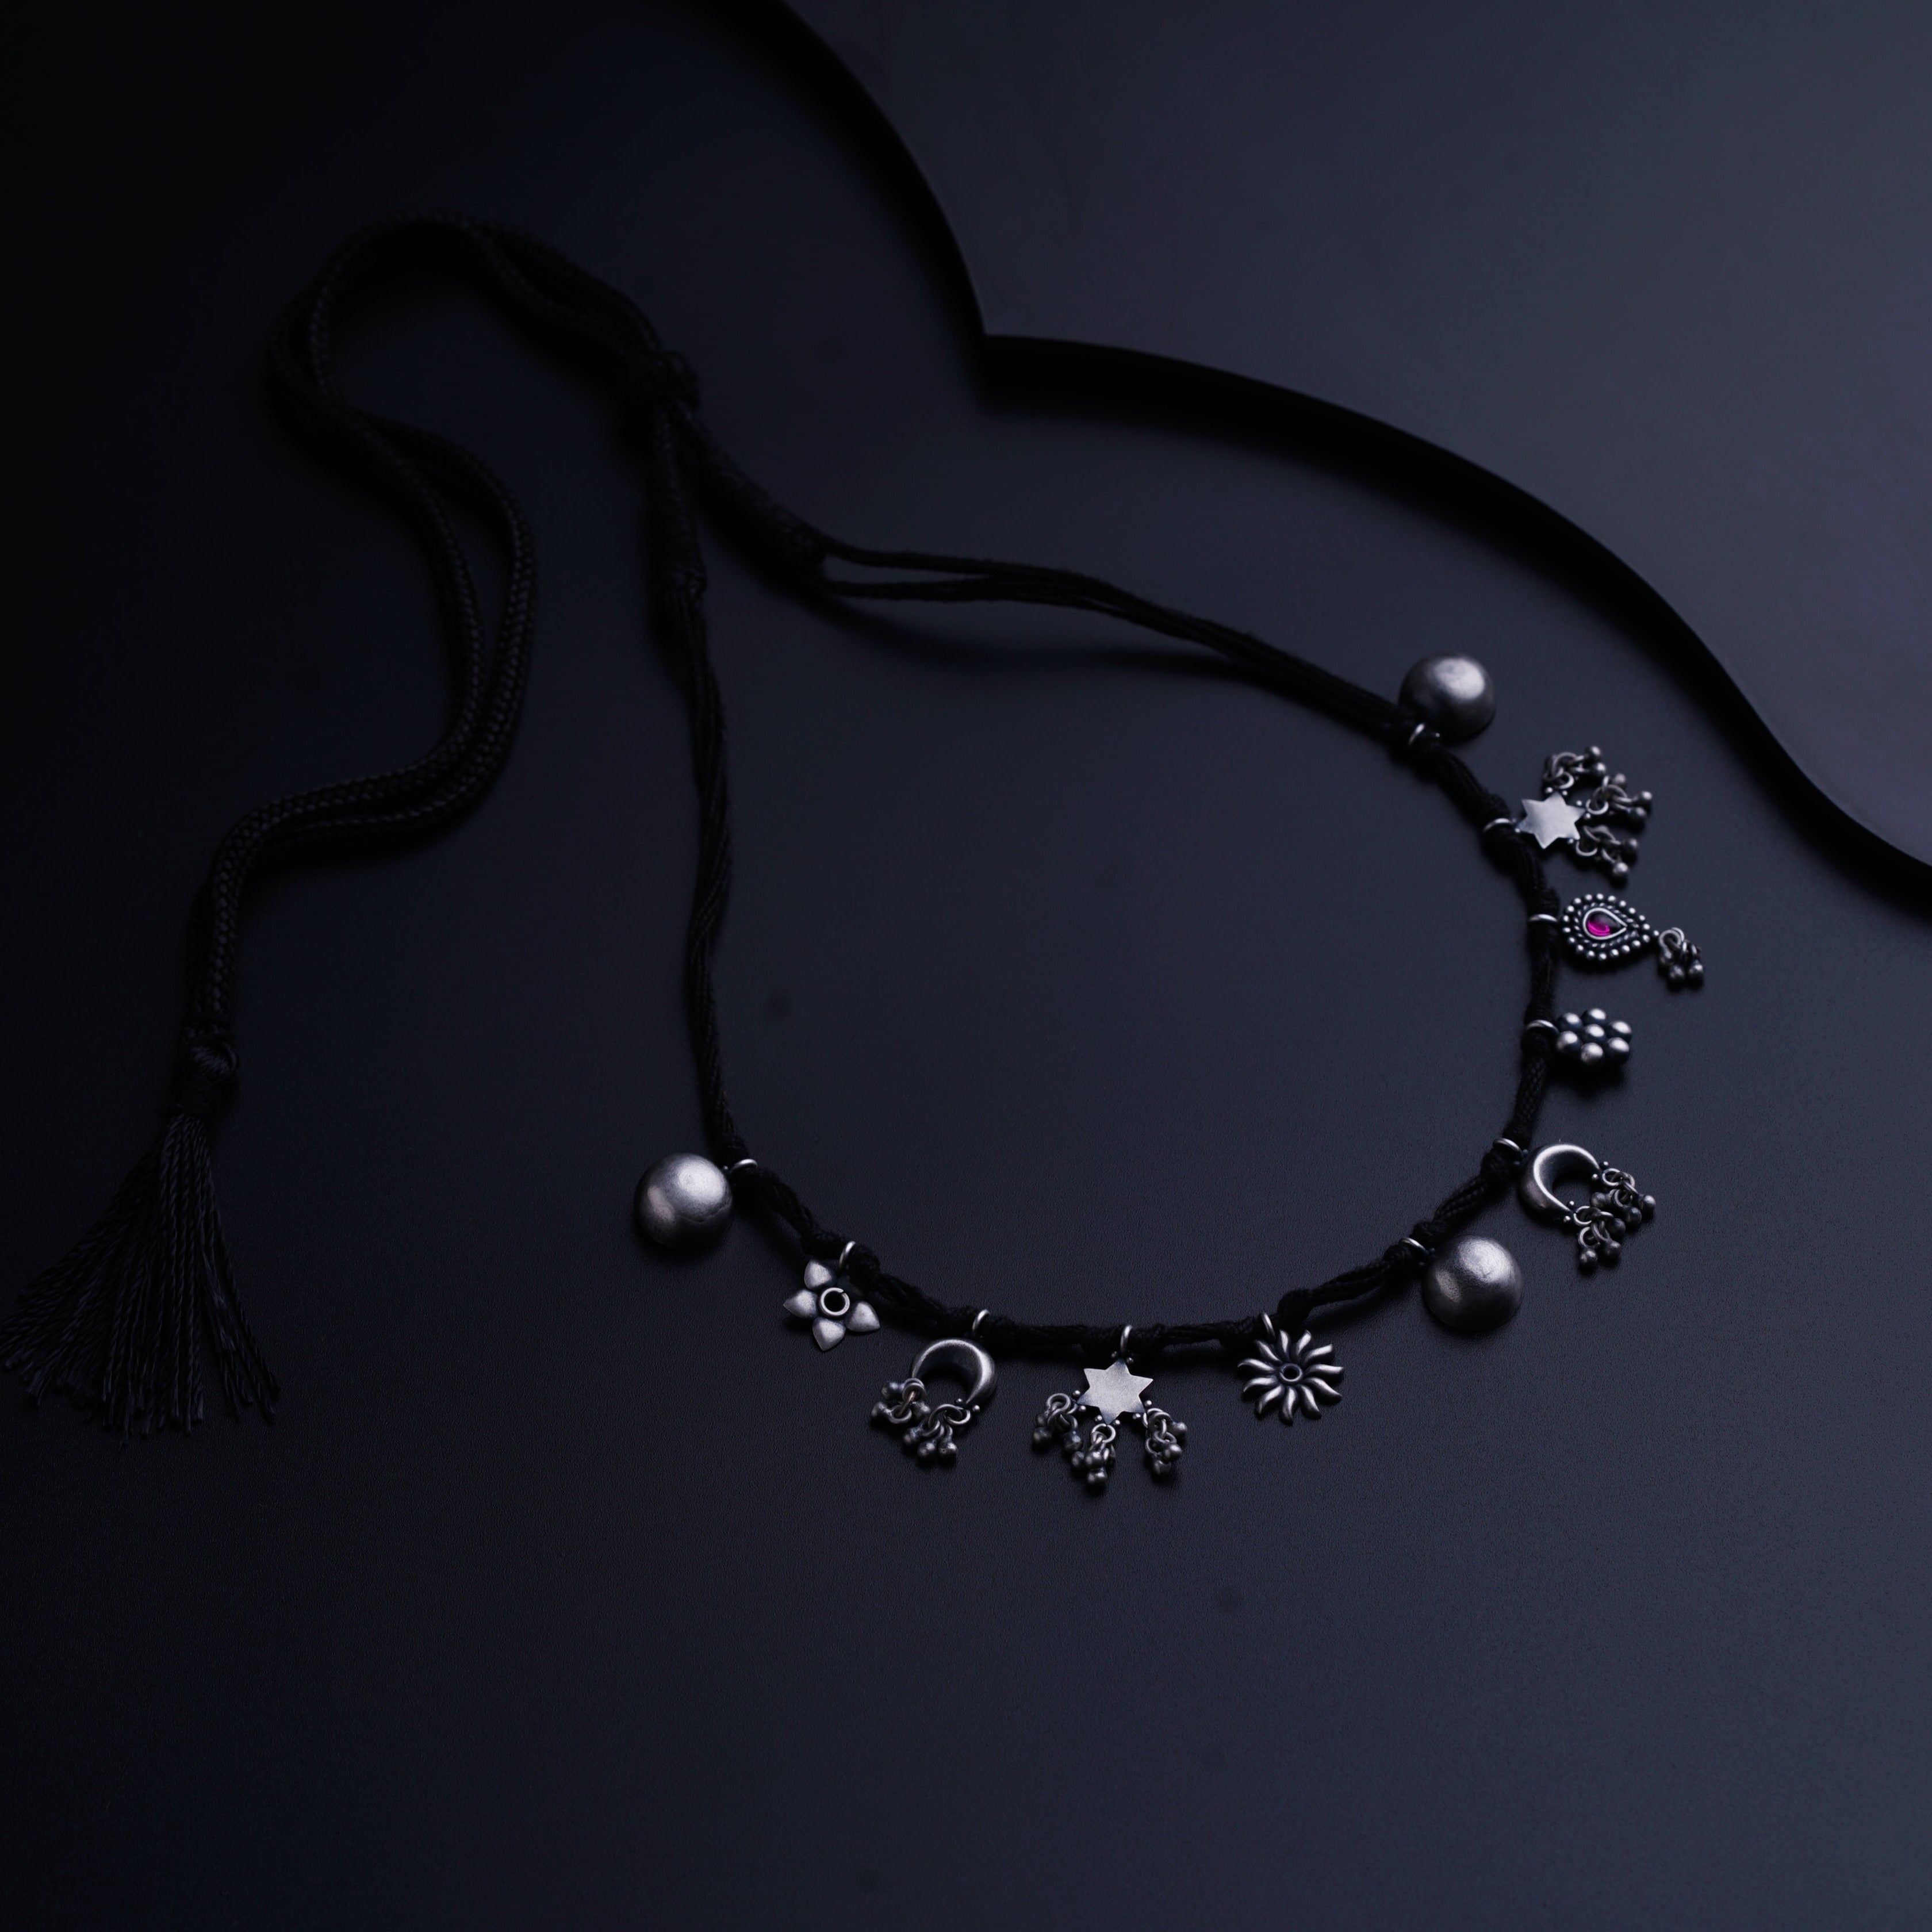 a black necklace with silver beads and a tassel